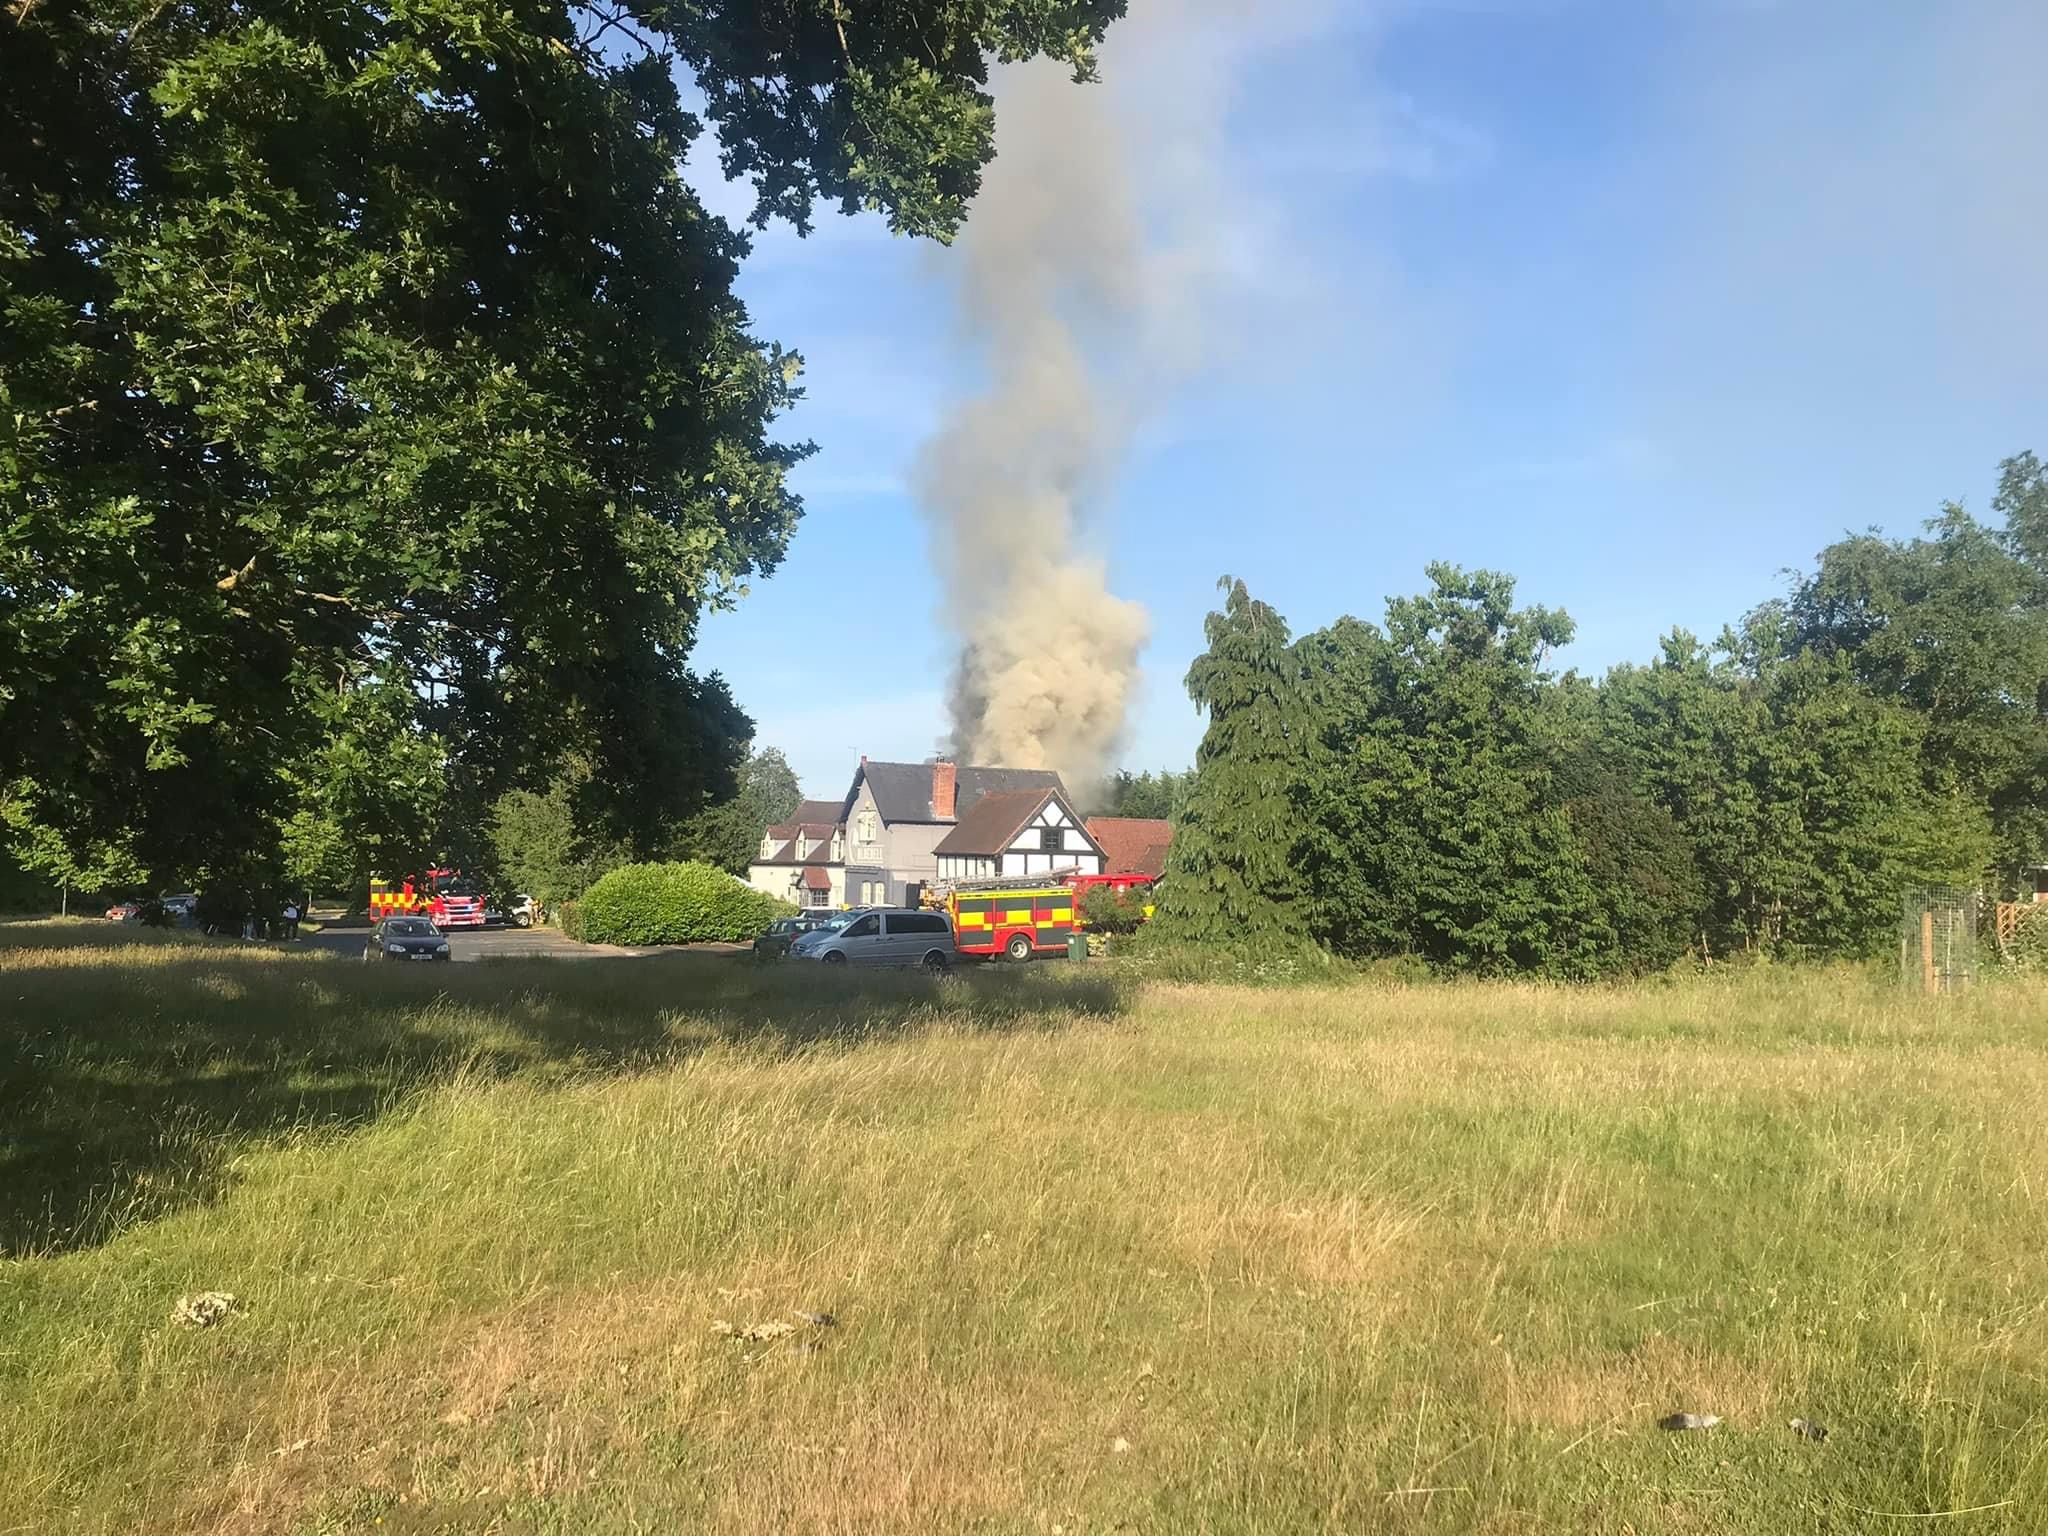 NEWS | Fire crews are currently responding to a fire at a popular pub